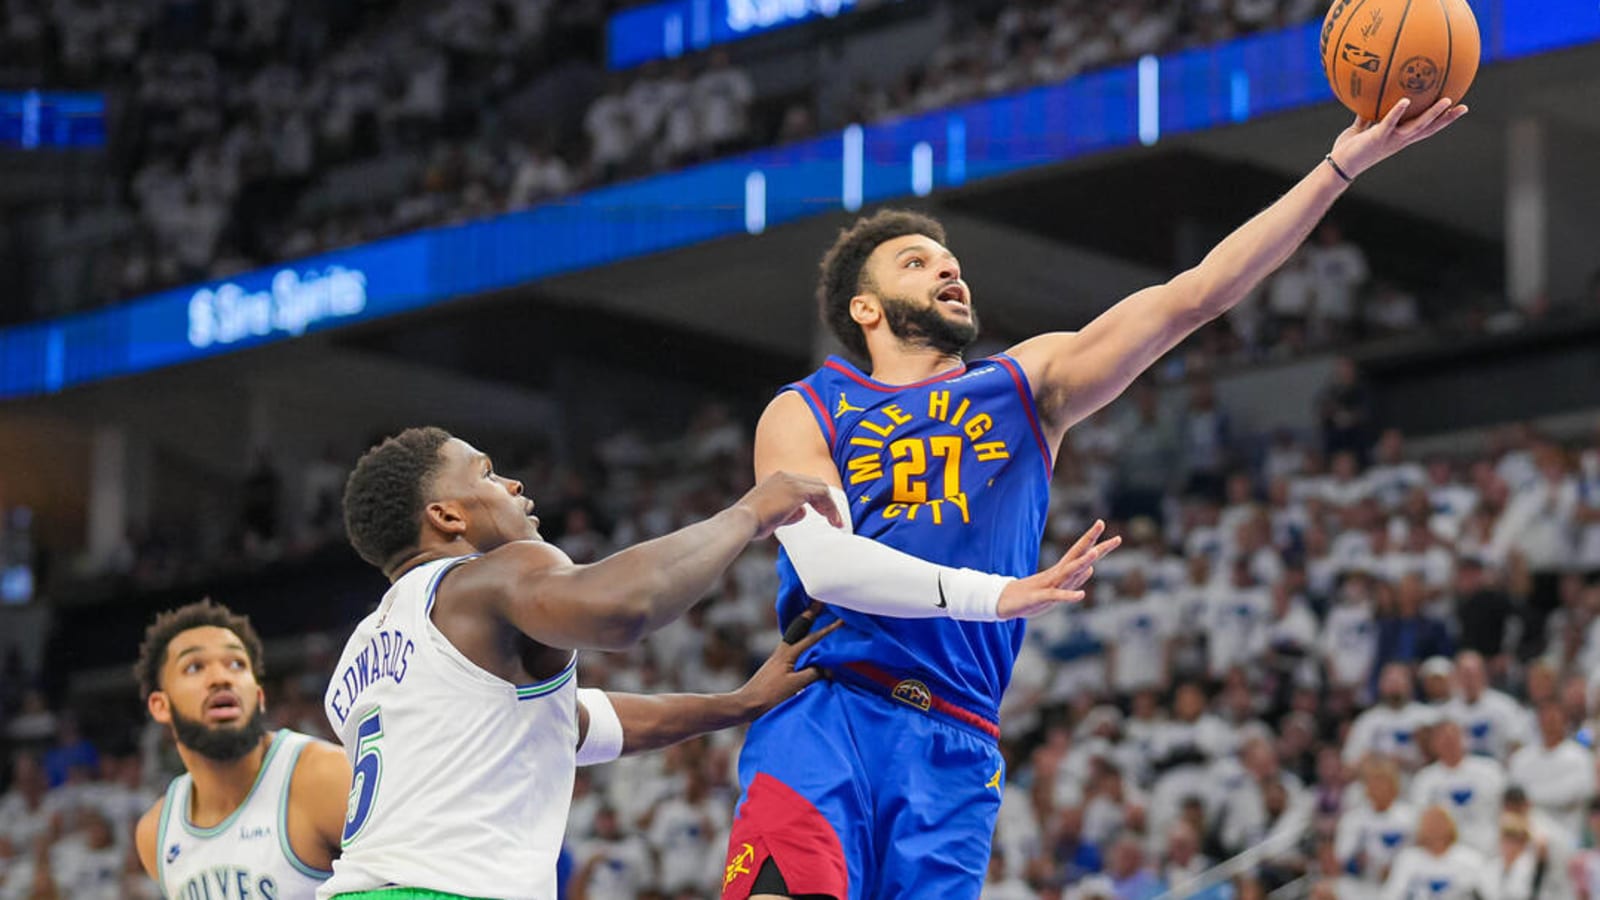 Add Nuggets-Timberwolves series to conference semifinals lore